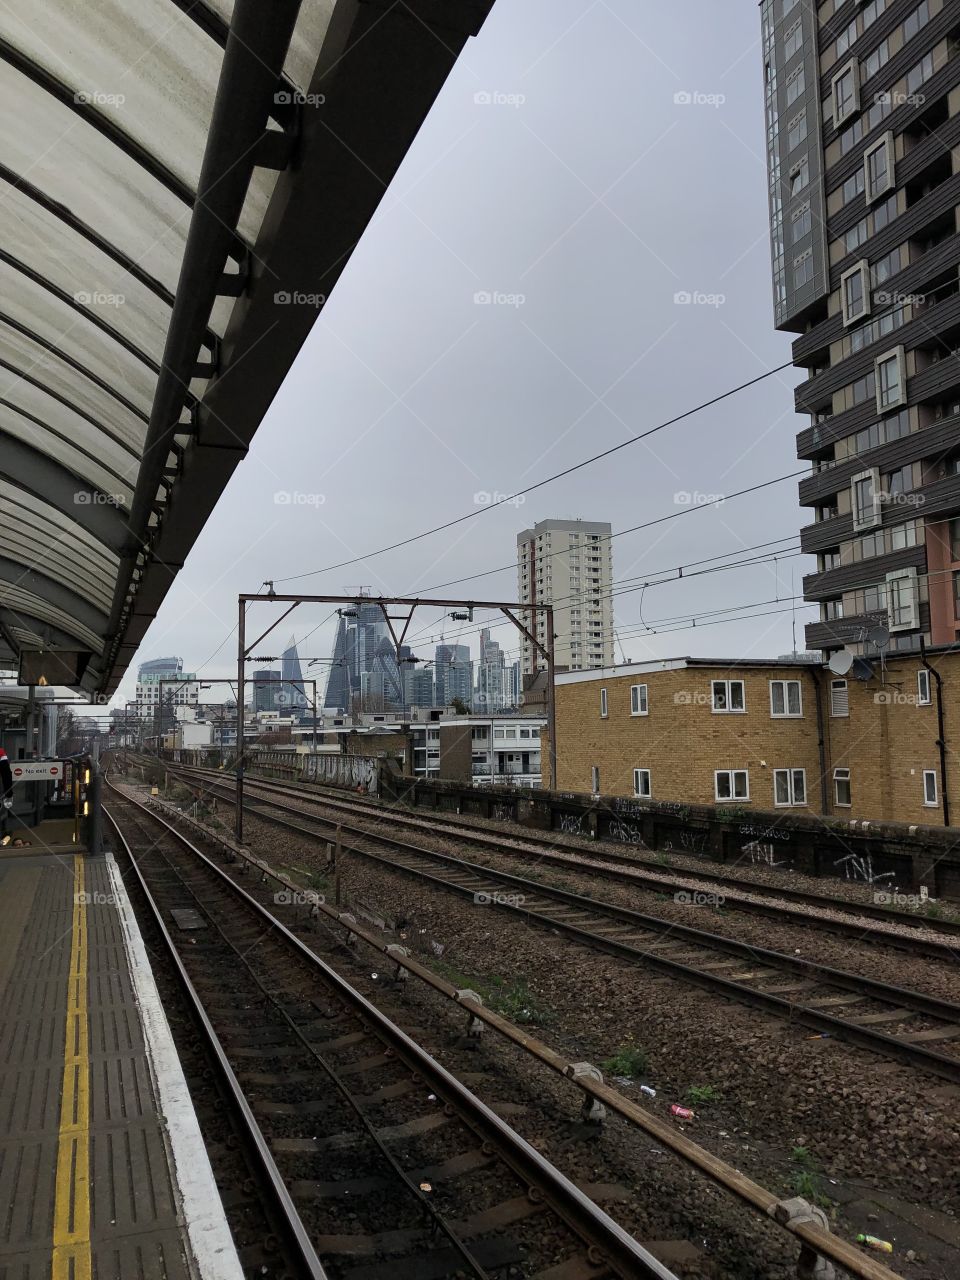 A dark and cloudy morning at Shadwell DLR station looking at the Bank/Monument (City) area of London.